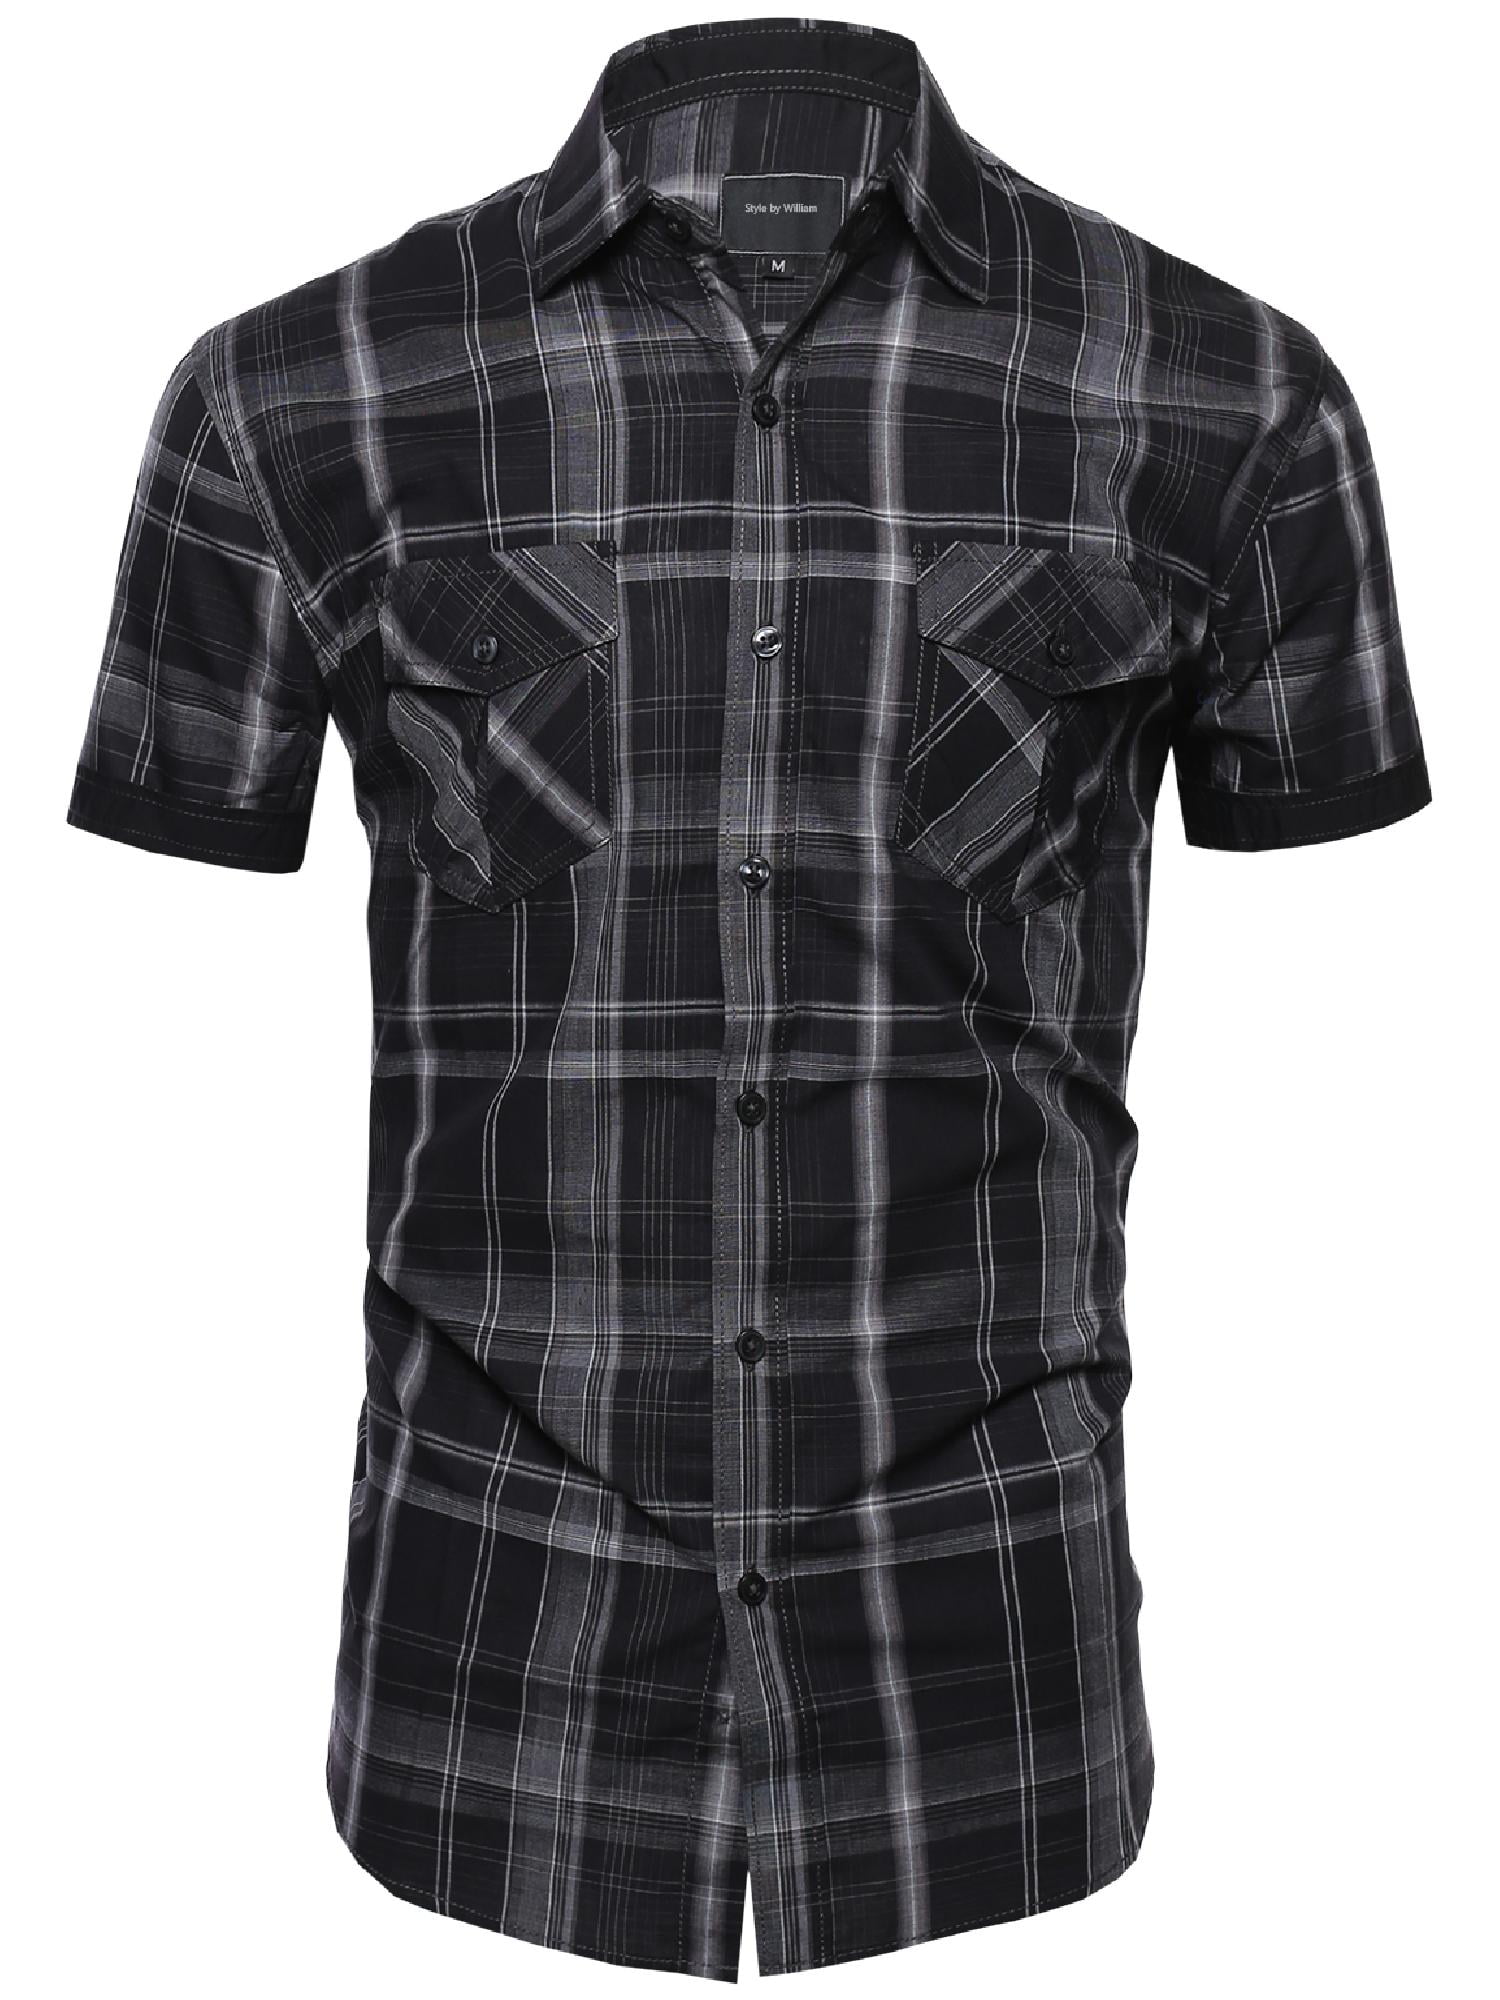 FashionOutfit Men's Loose Fit Plaid Checkered Short Sleeve Button Down Shirt Top 